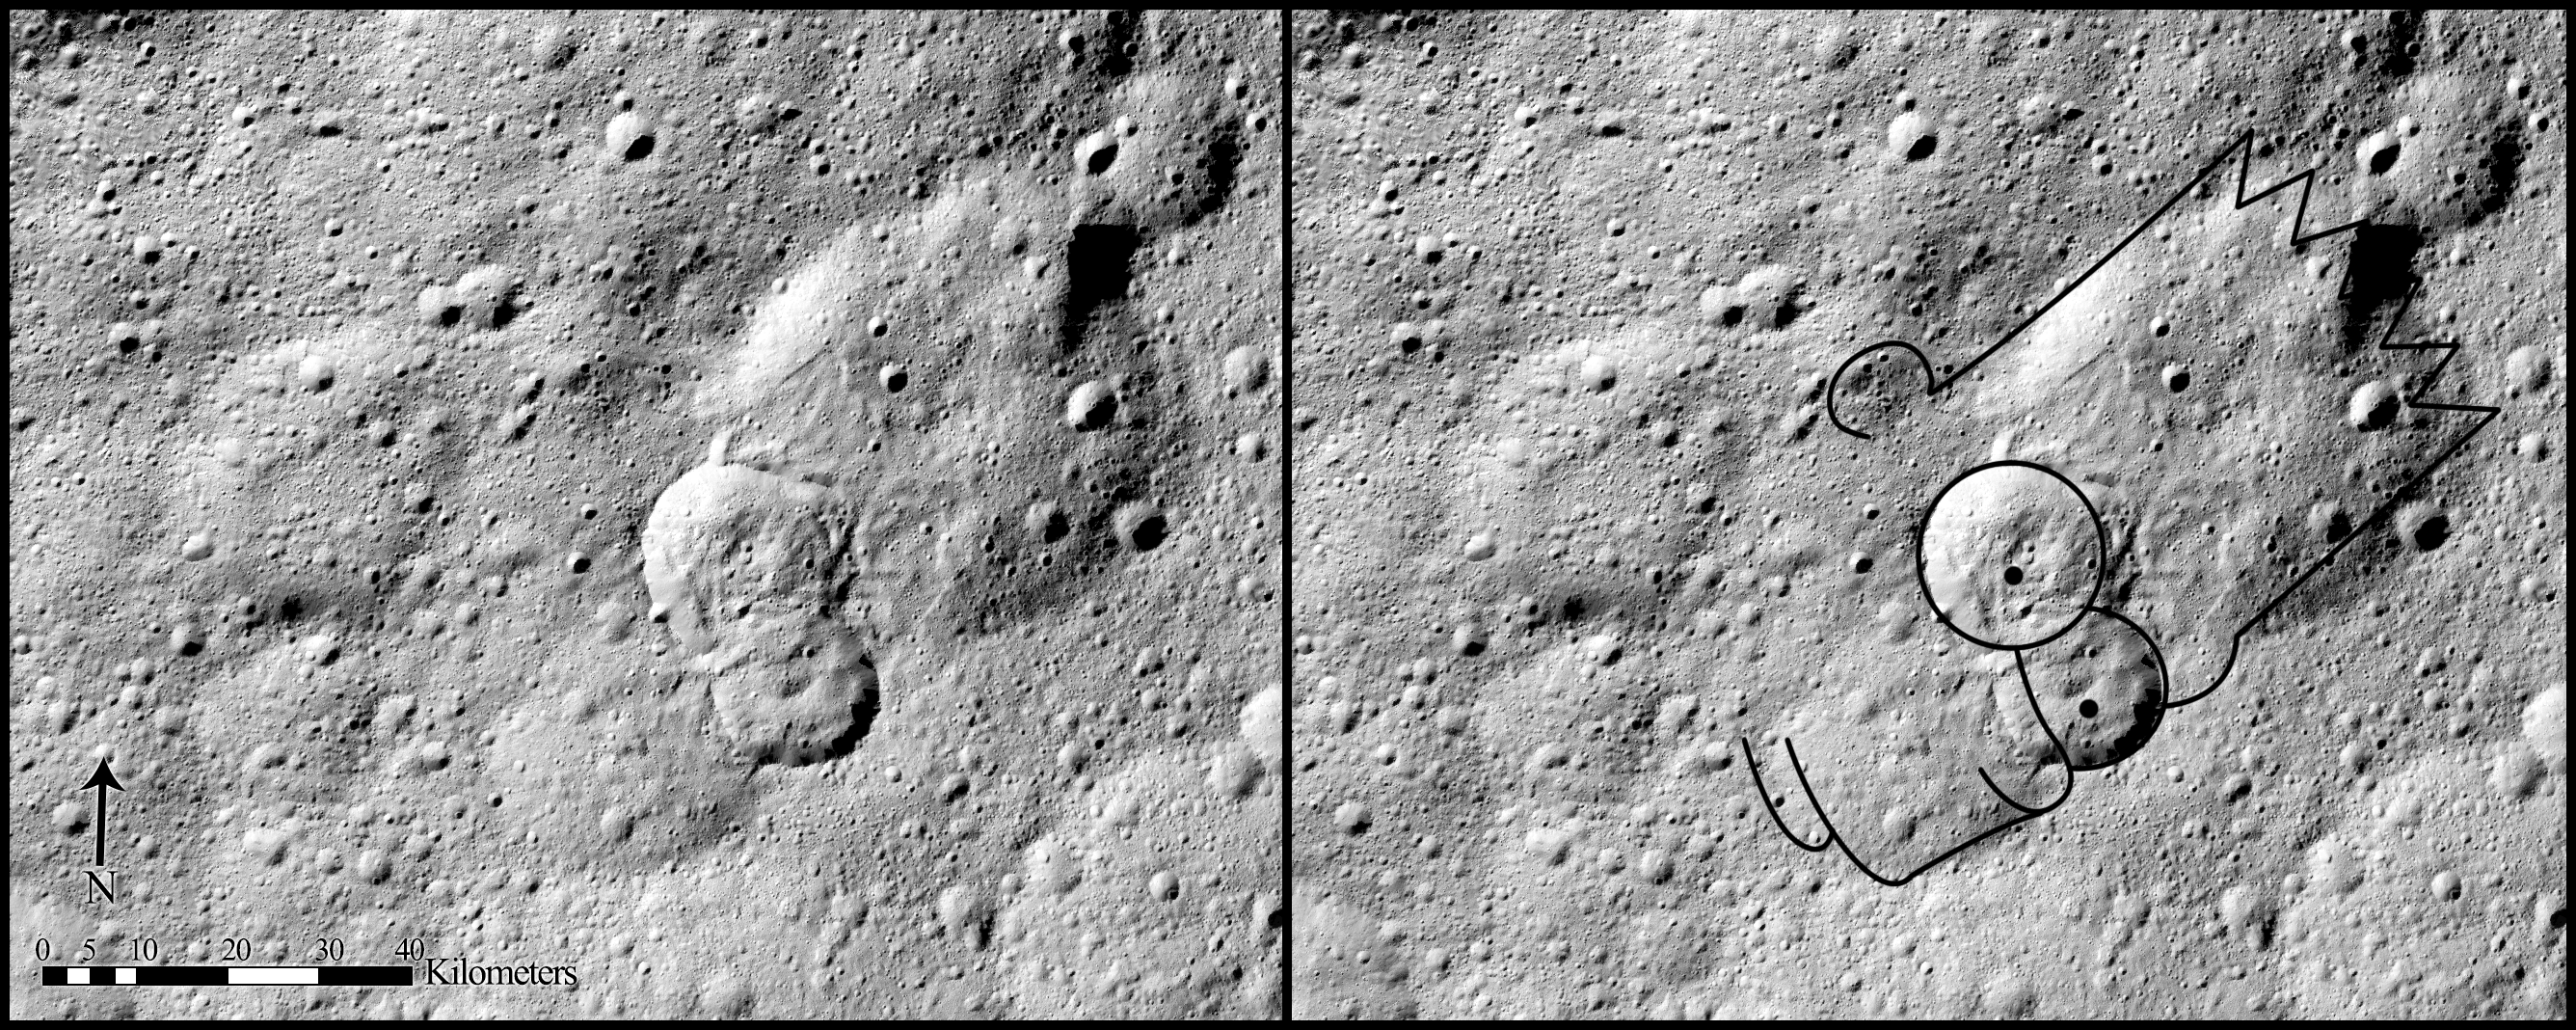 Type II features are the most common of Ceres’ landslides and look similar to deposits left by avalanches on Earth. This one also looks similar to TV's Bart Simpson. Credit: NASA/JPL-Caltech/UCLA/MPS/DLR/IDA, taken by Dawn Framing Camera